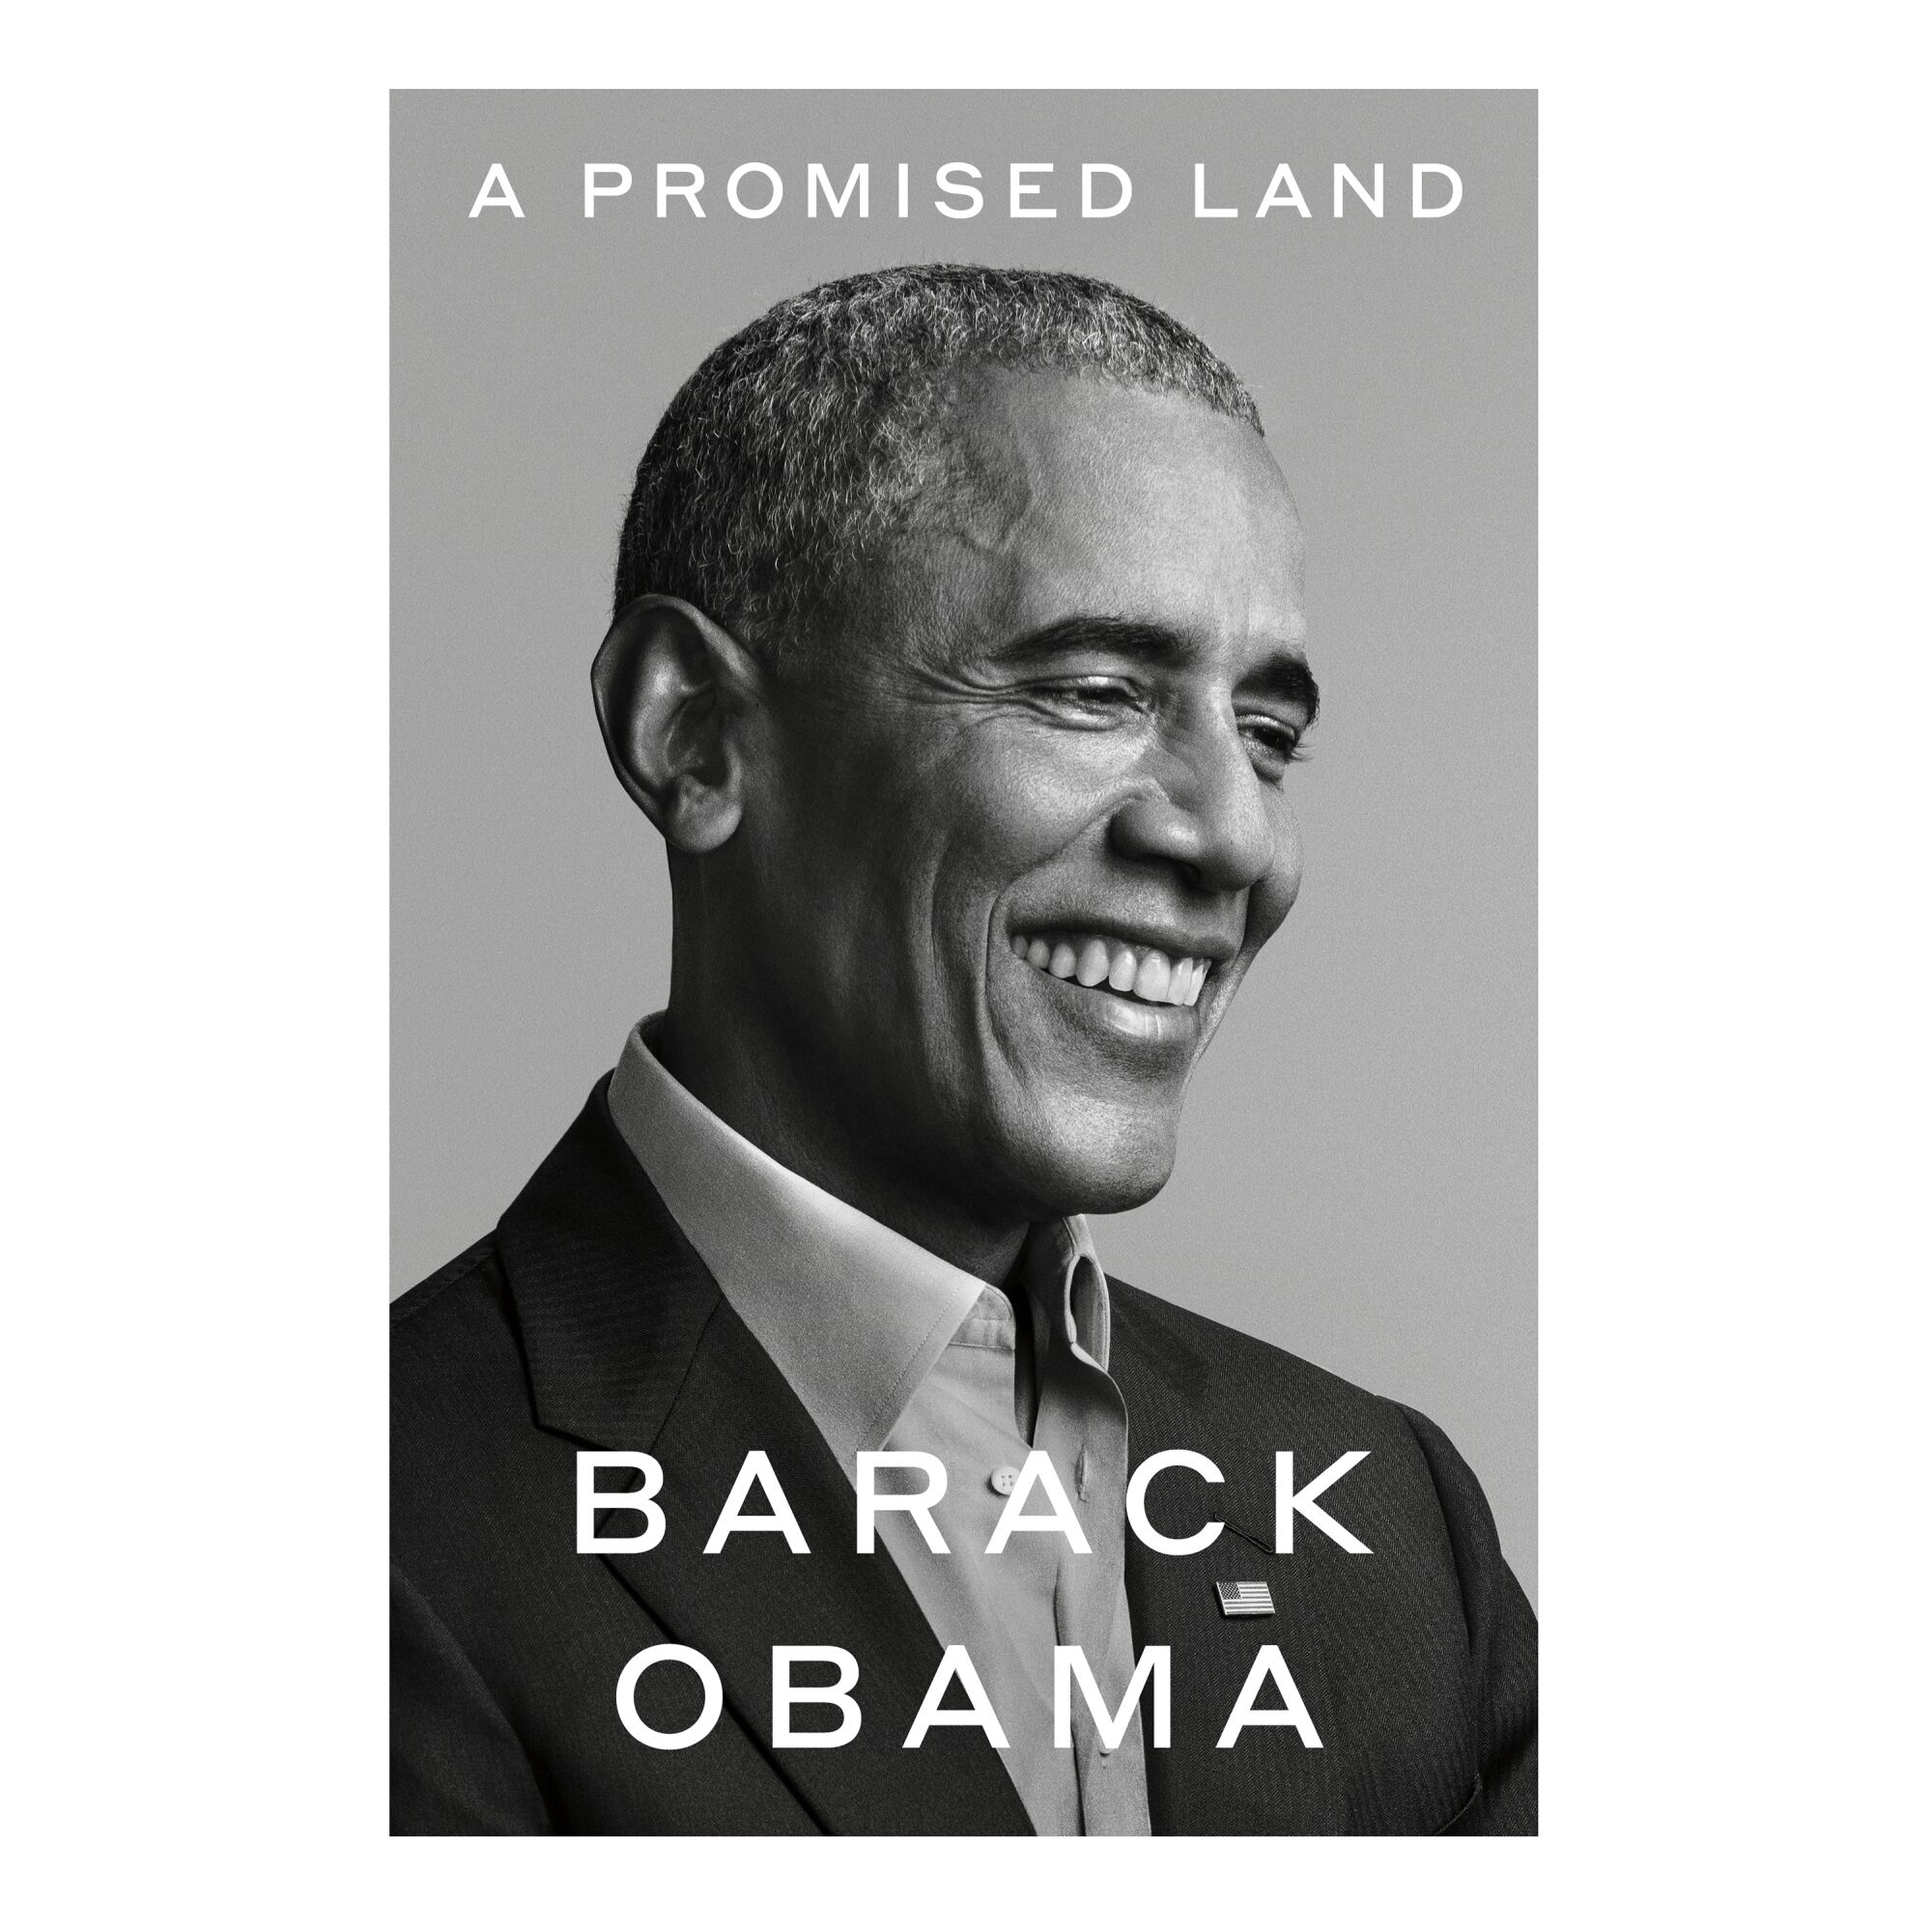 HOLIDAY GIFT GUIDE - Cover of the book A Promised Land by Barack Obama.